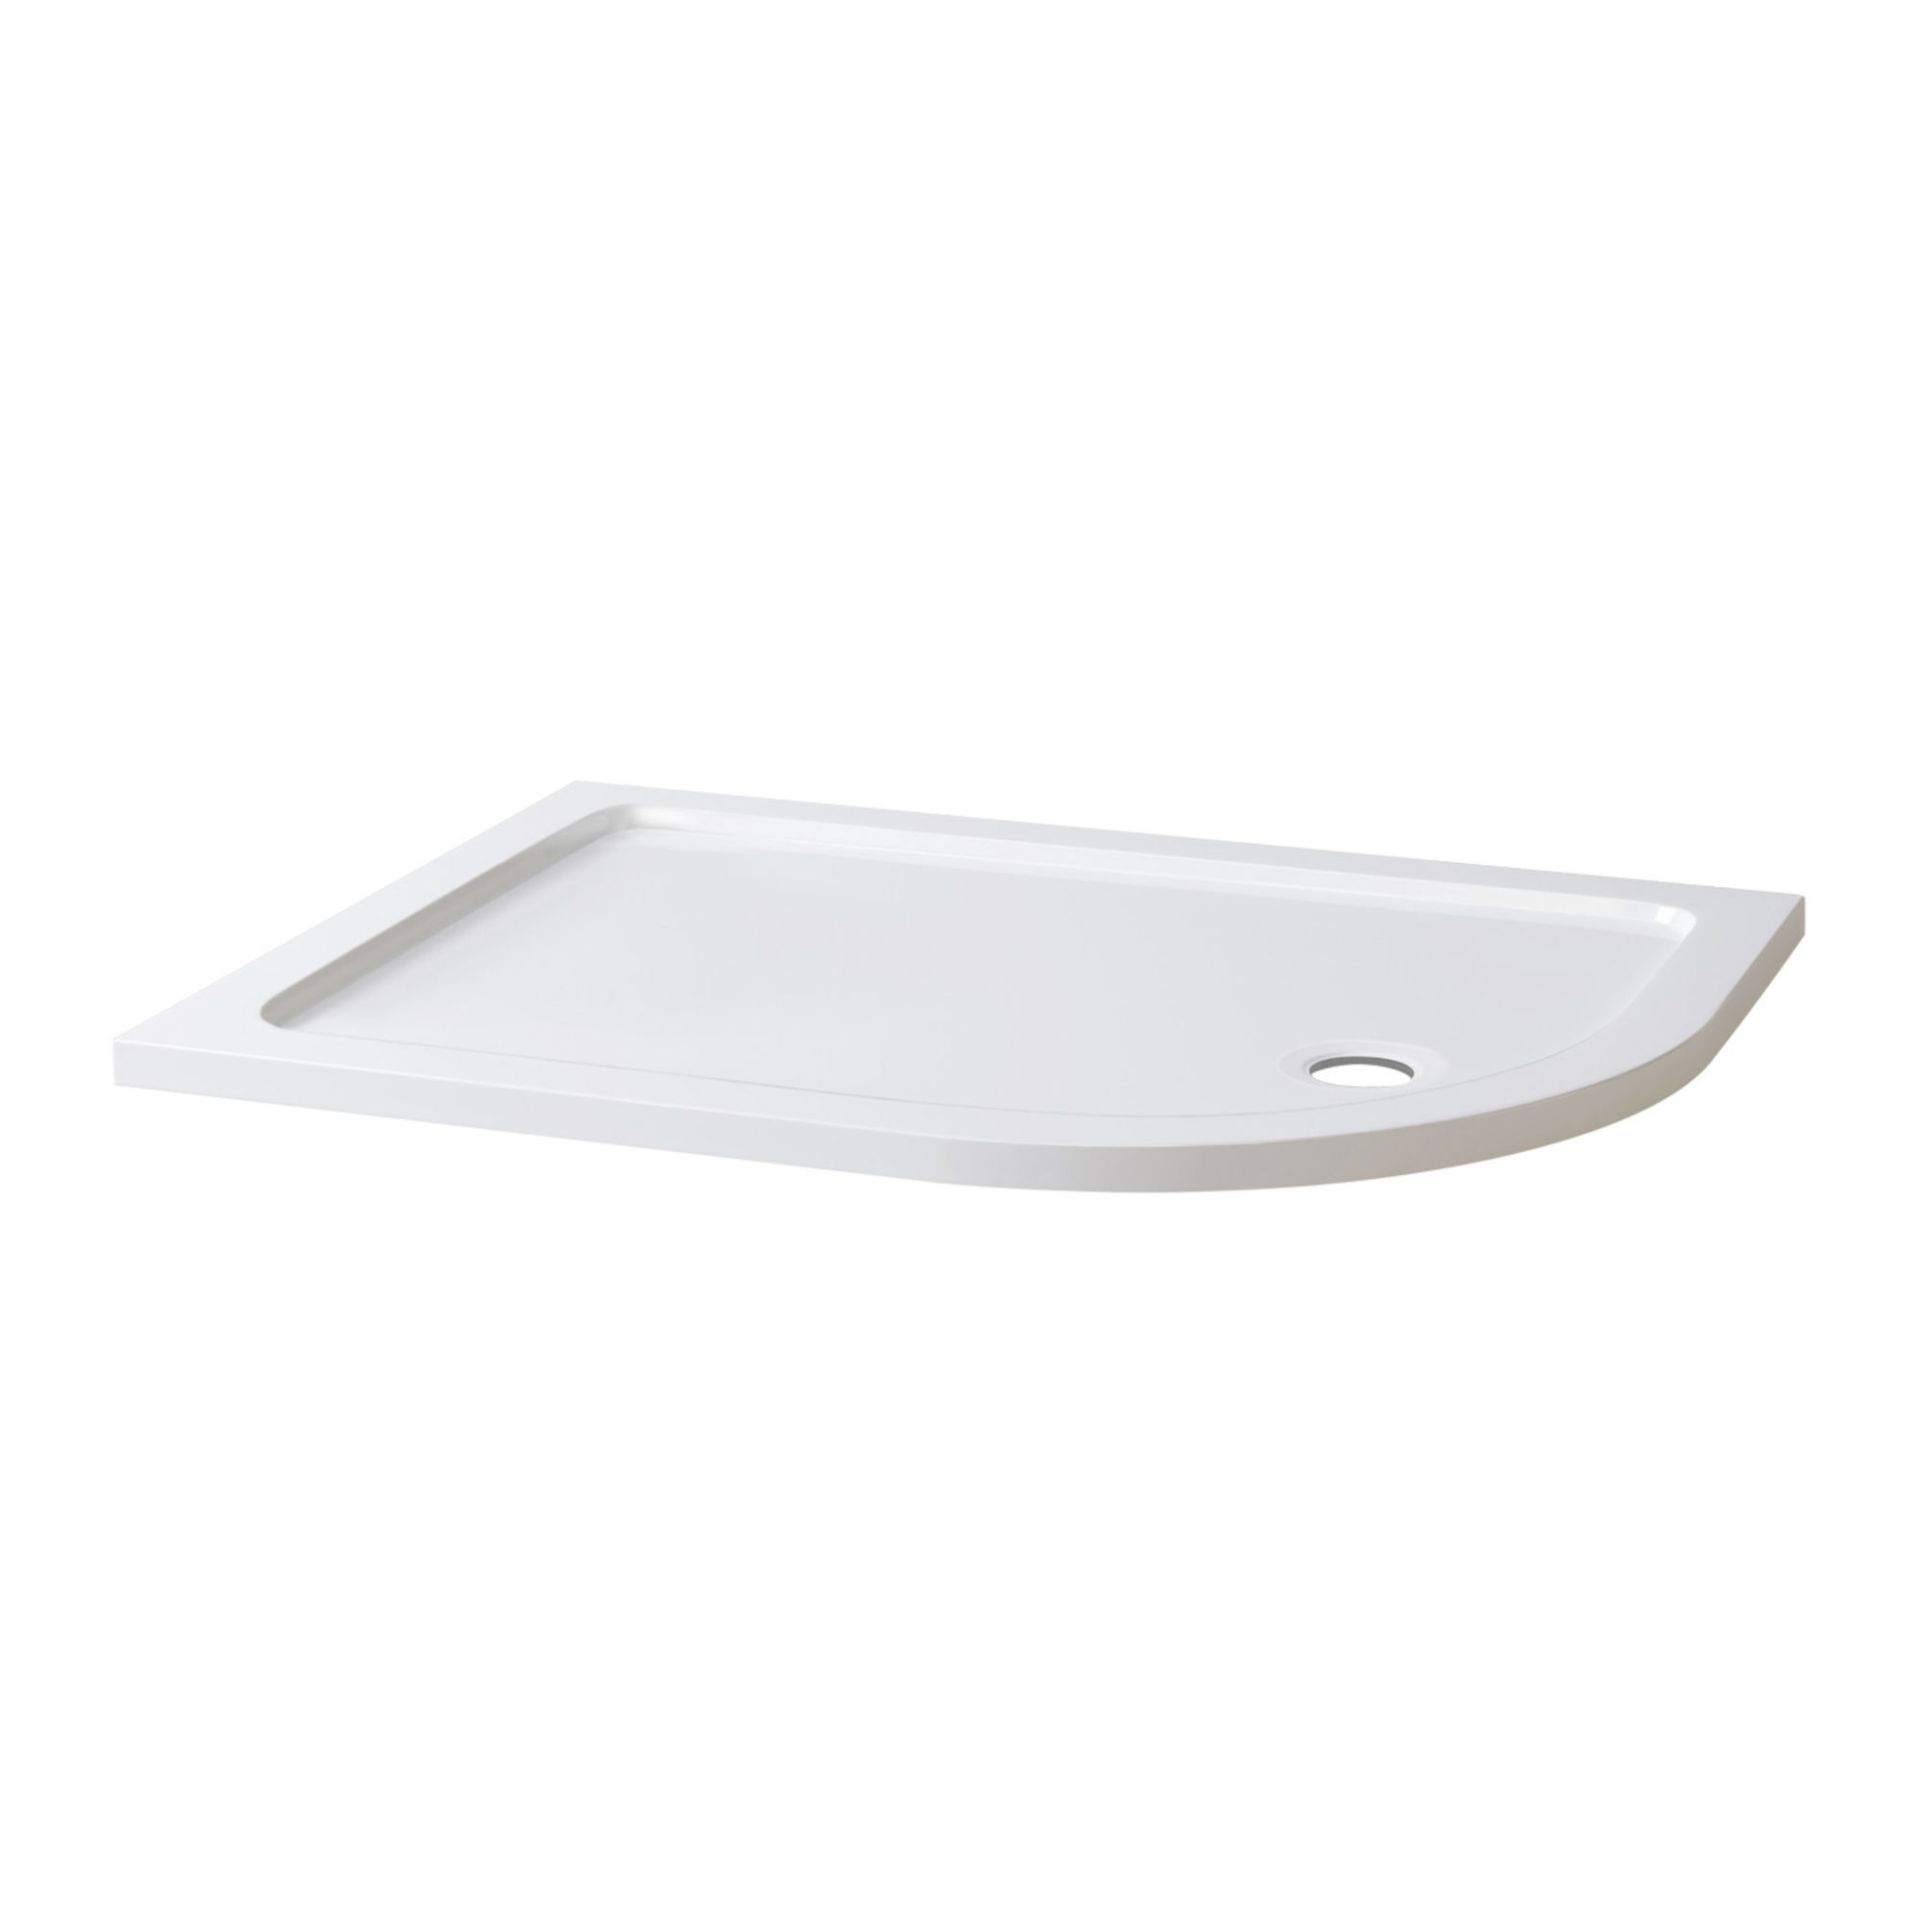 (AD54) 1200x900mm Offset Quadrant Ultra Slim Stone Shower Tray - Right. RRP £234.99. Low profile - Image 3 of 3